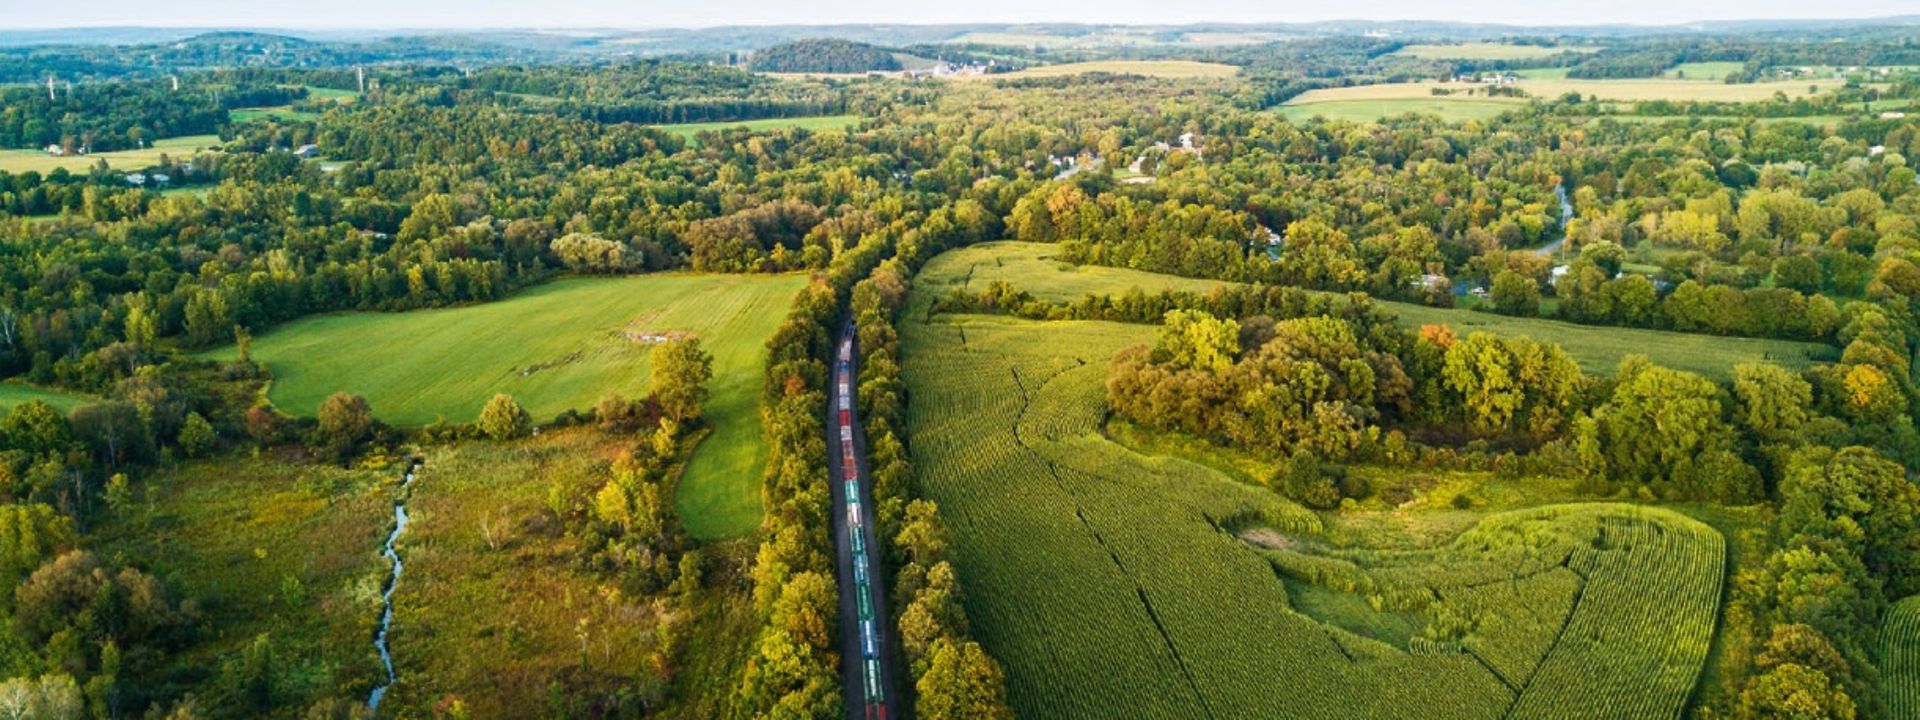 Train in green landscape from air perspective